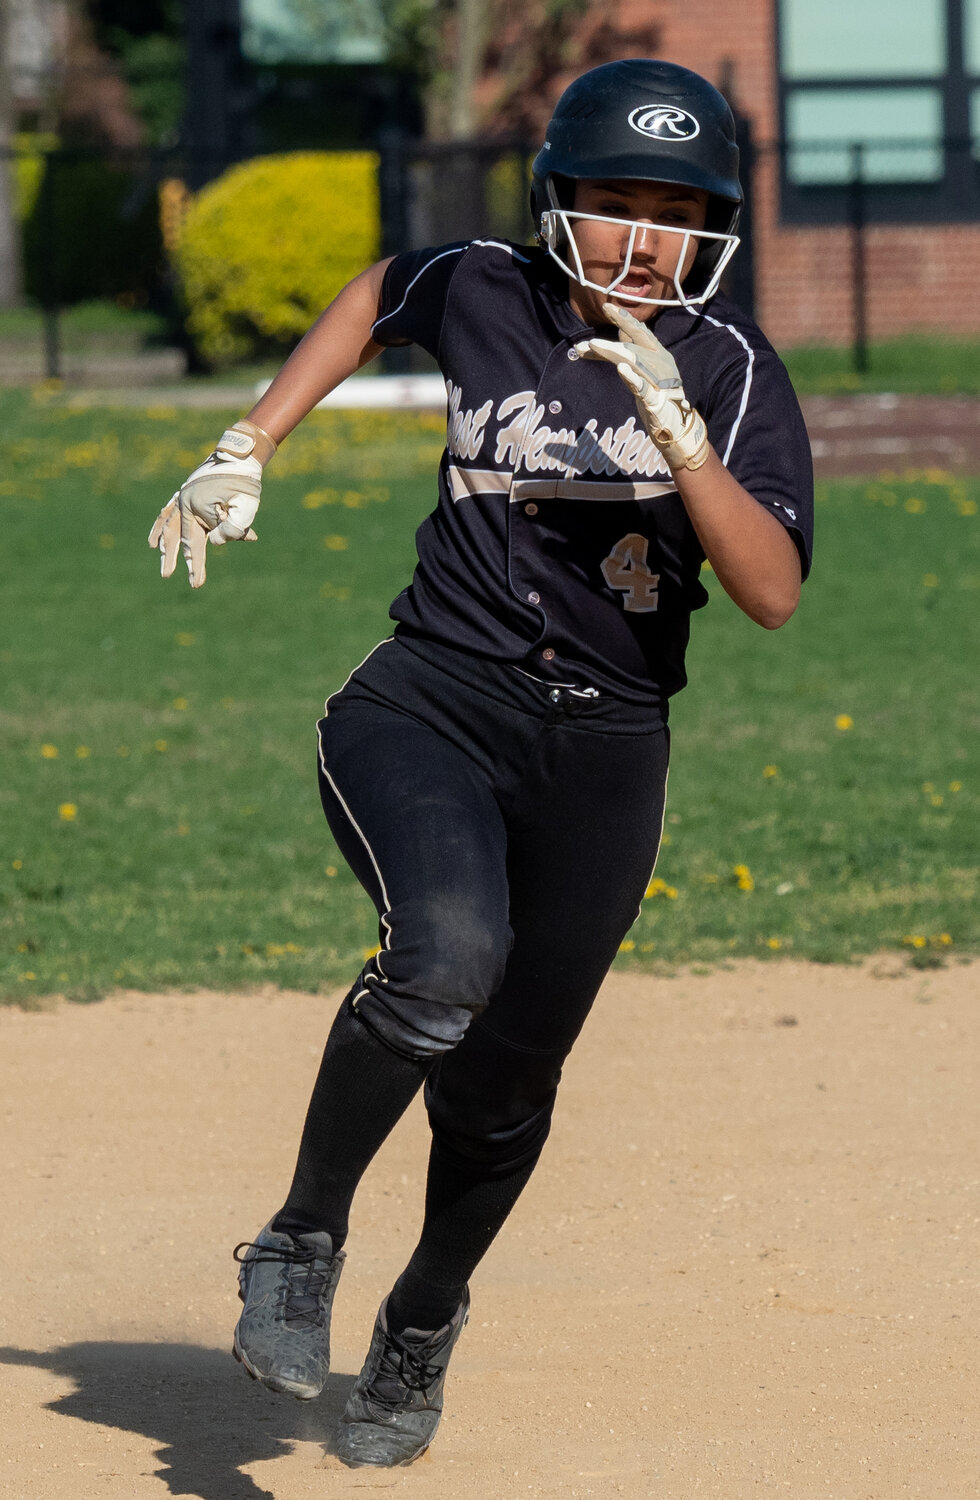 Ashlee Boodoo is one of West Hempstead’s three senior softball players and took over as its top pitcher while sparking the offense from the leadoff spot.